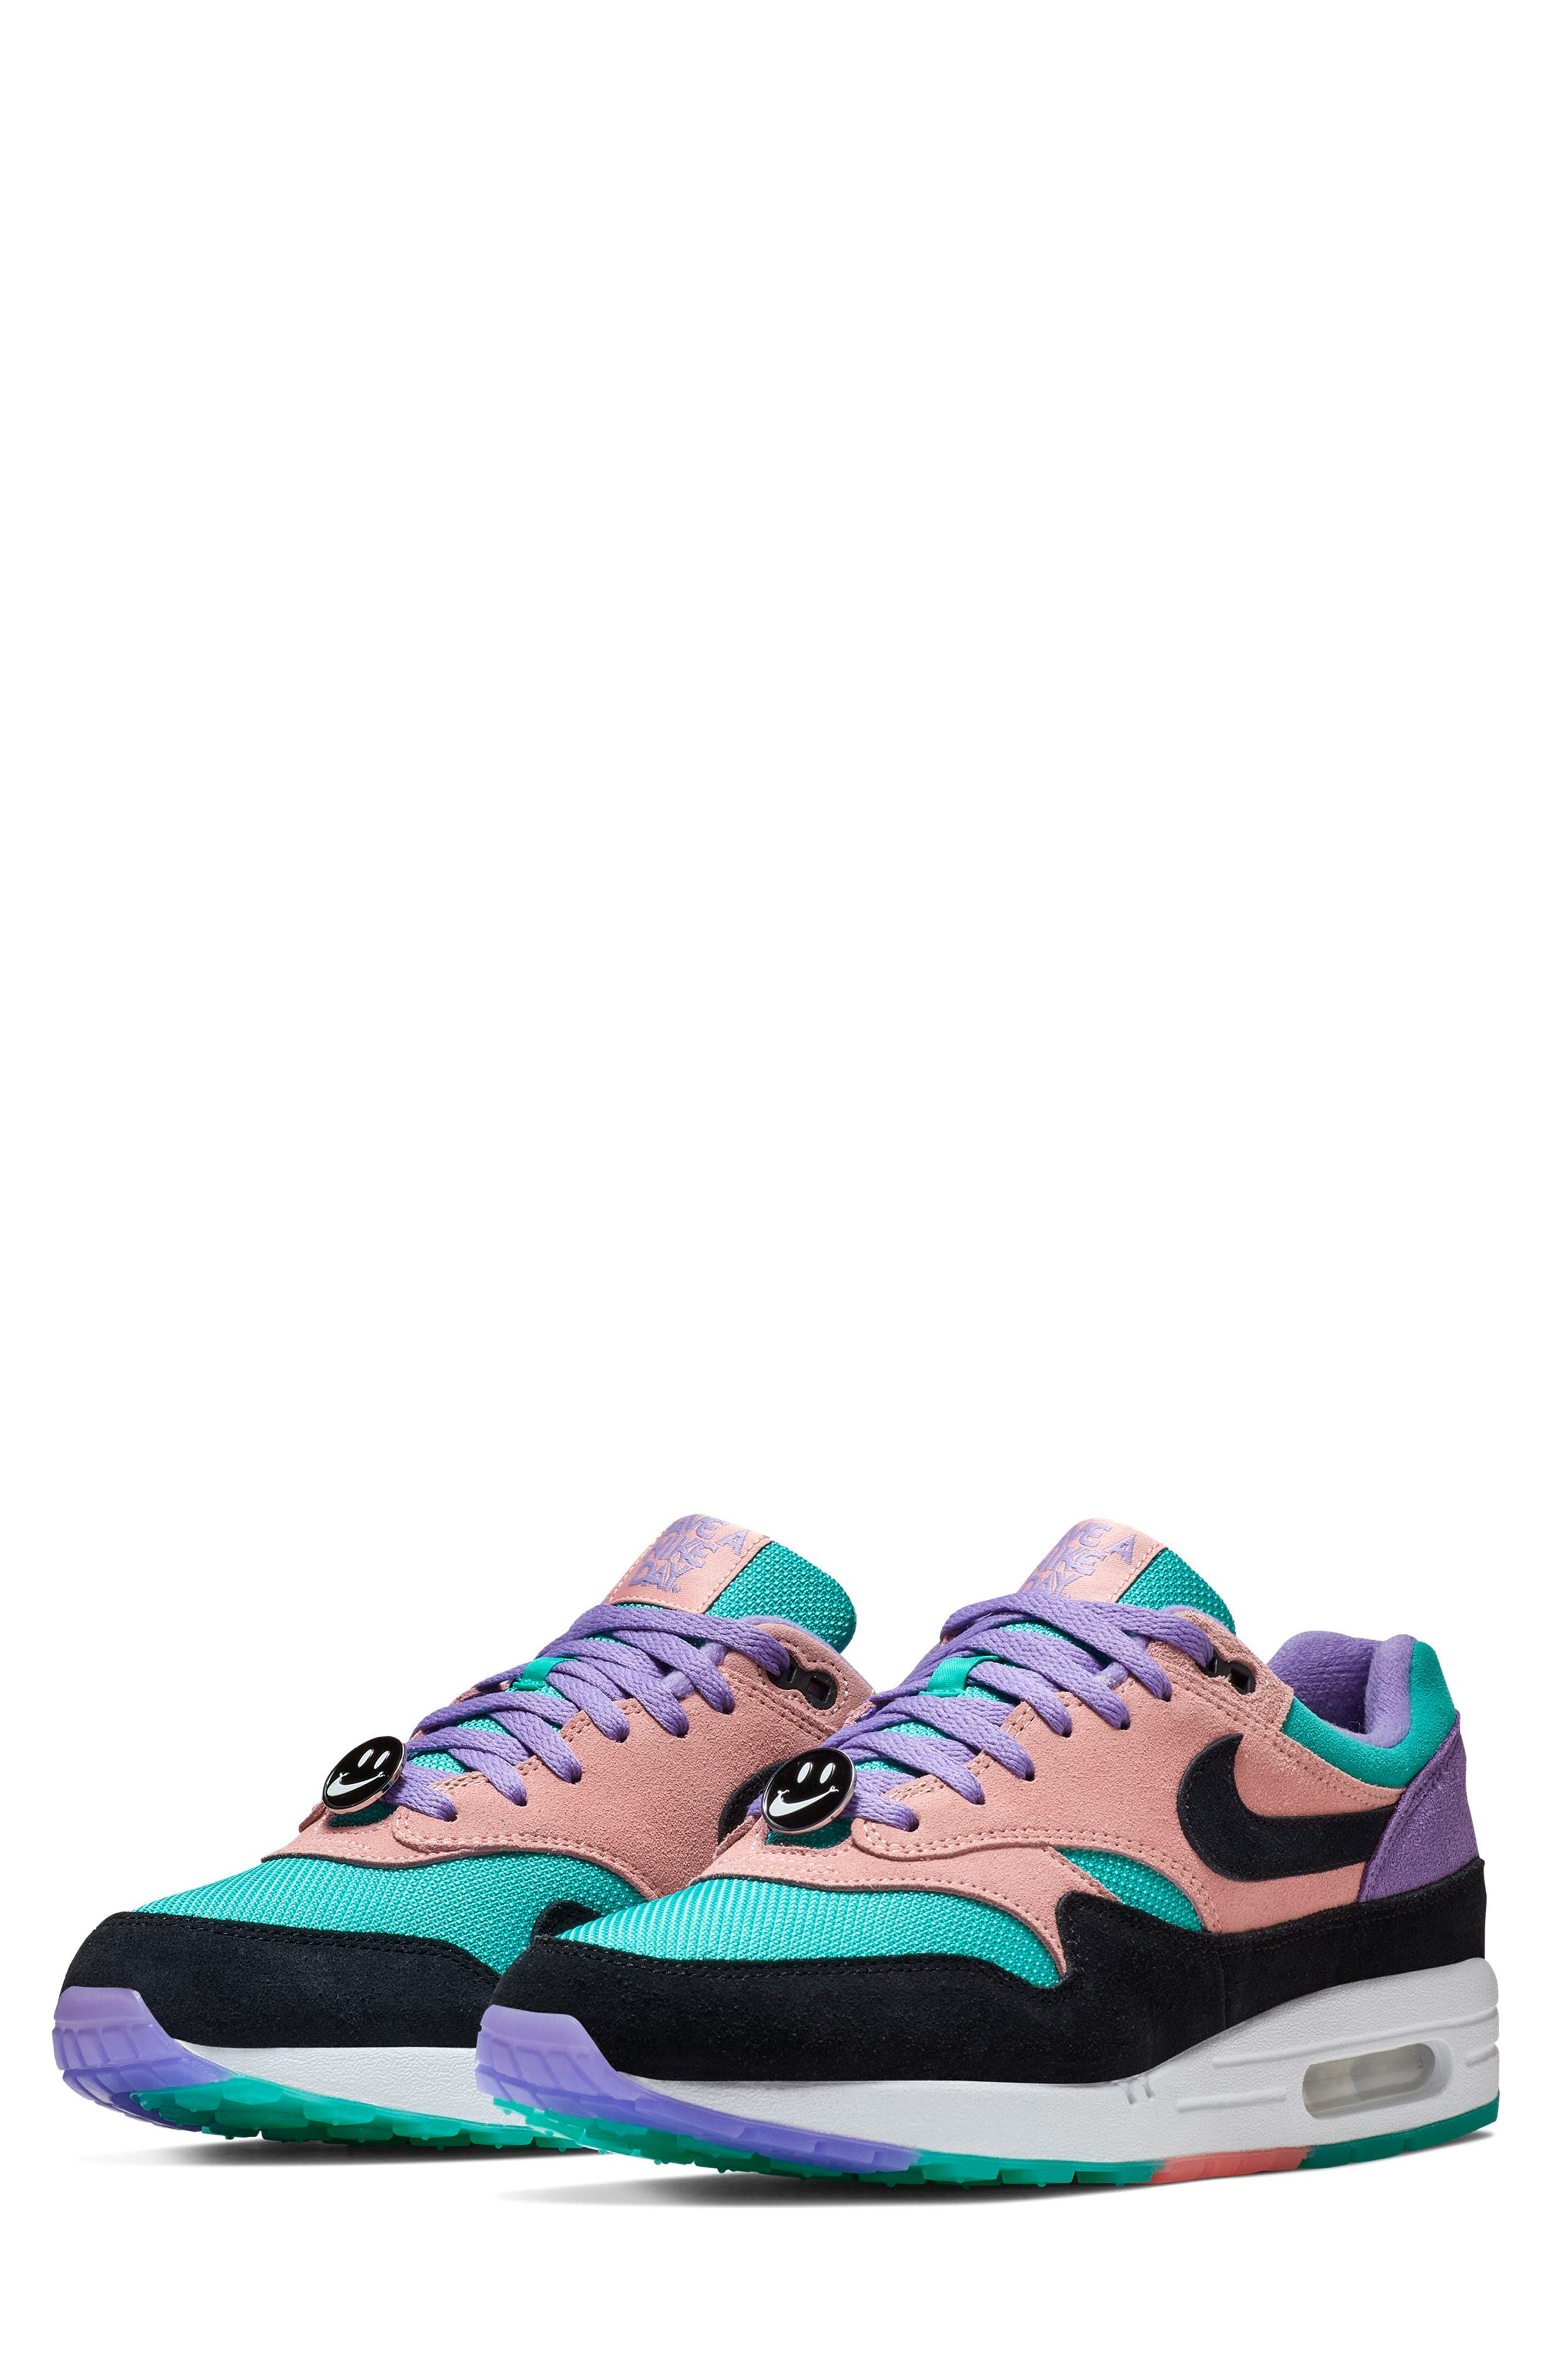 Nike Air Max 1 Have a Nike Day Sneaker 